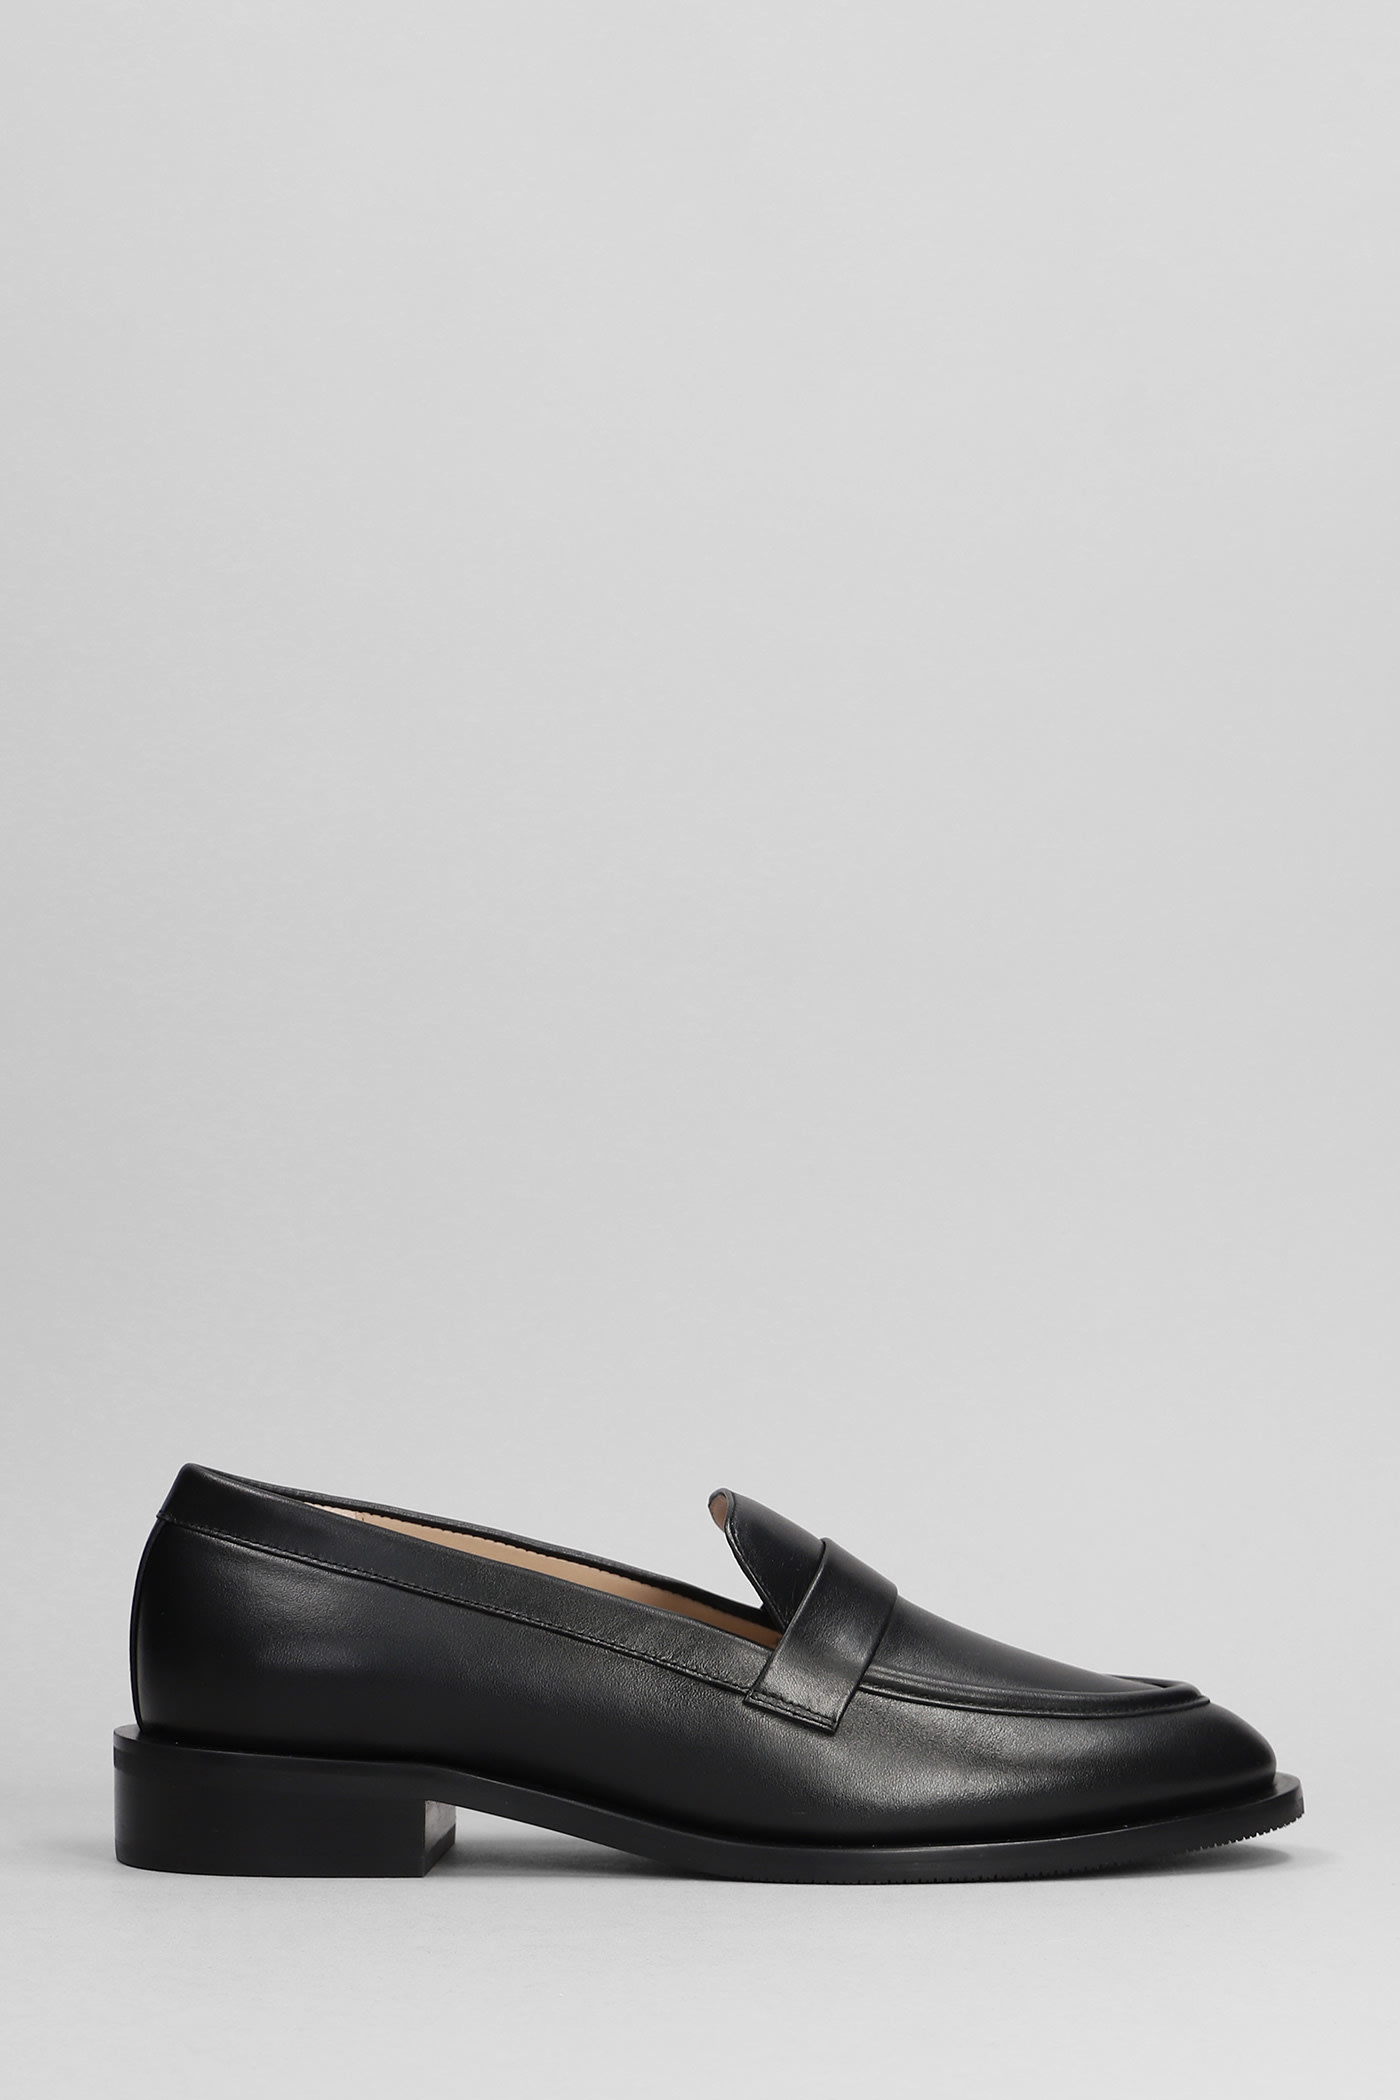 STUART WEITZMAN PALMER LOAFERS IN BLACK LEATHER